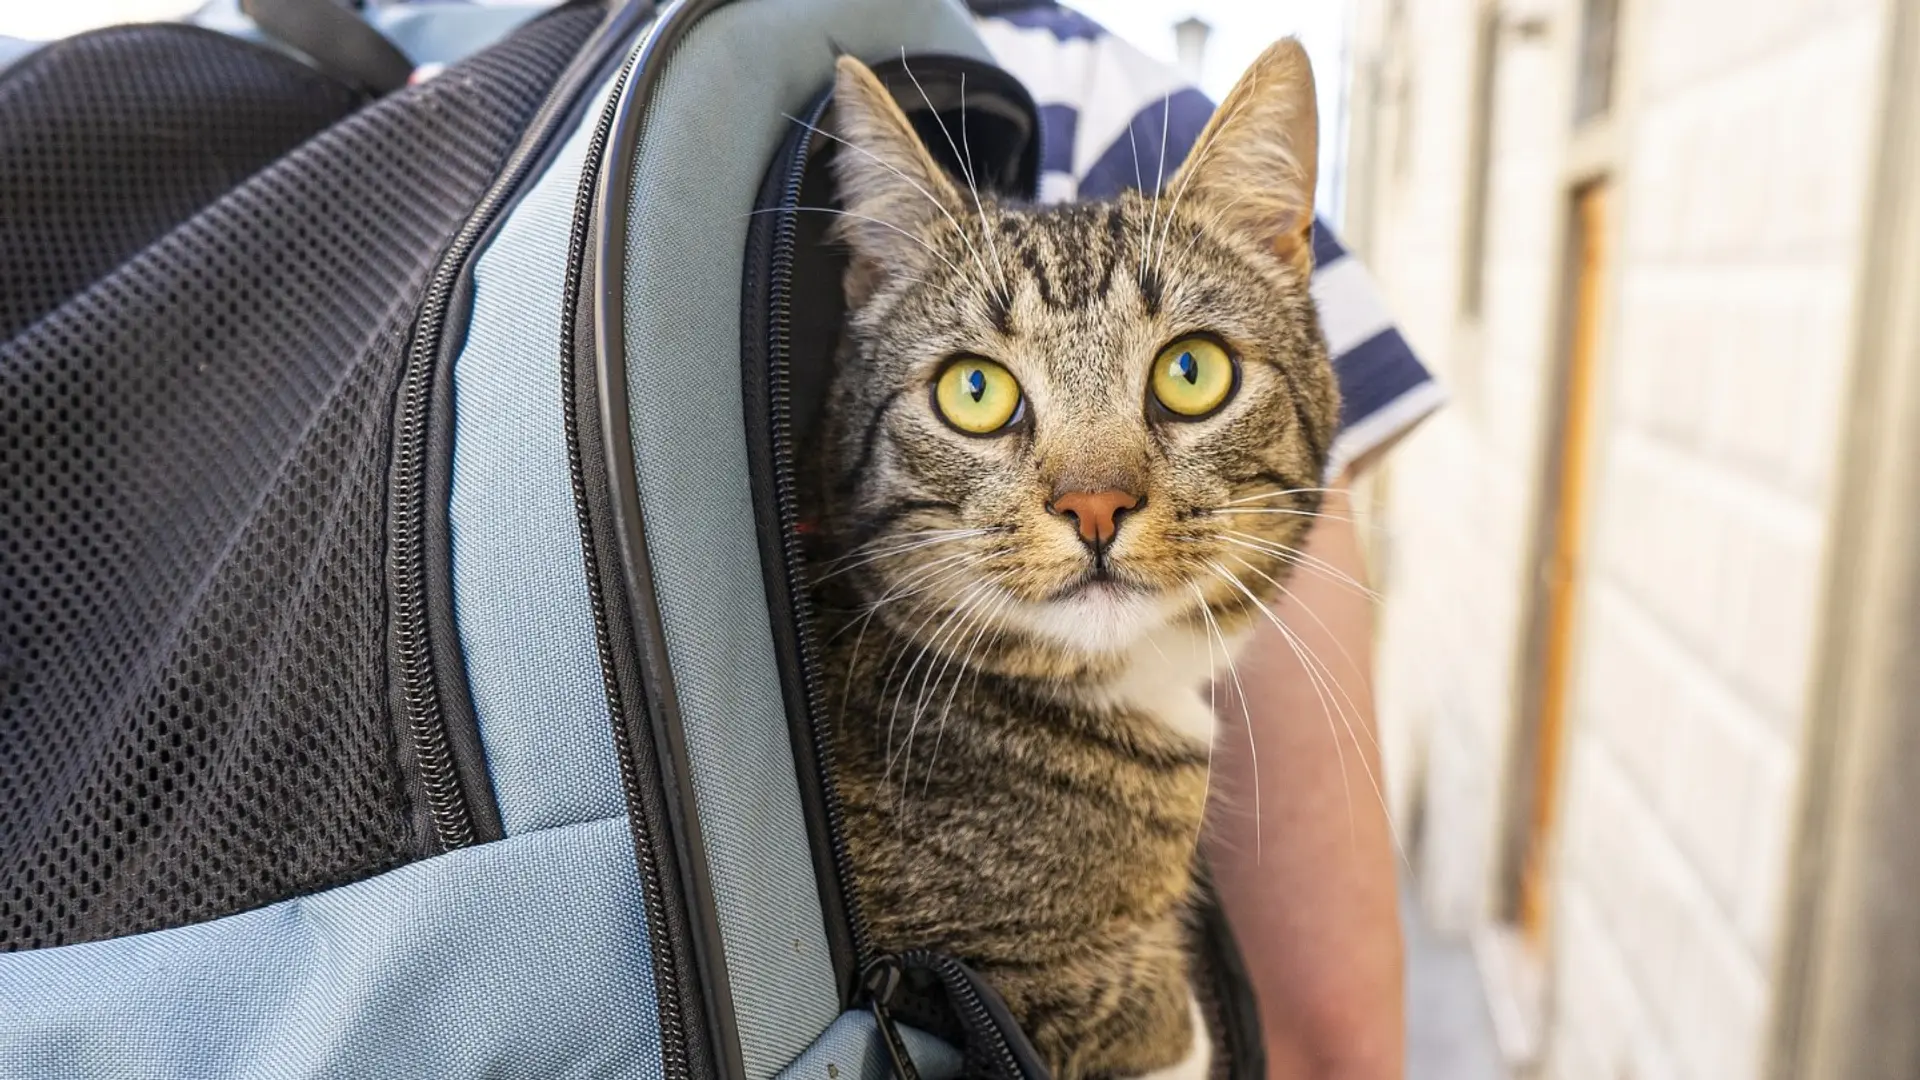 A guy walking with a cat in his backpack